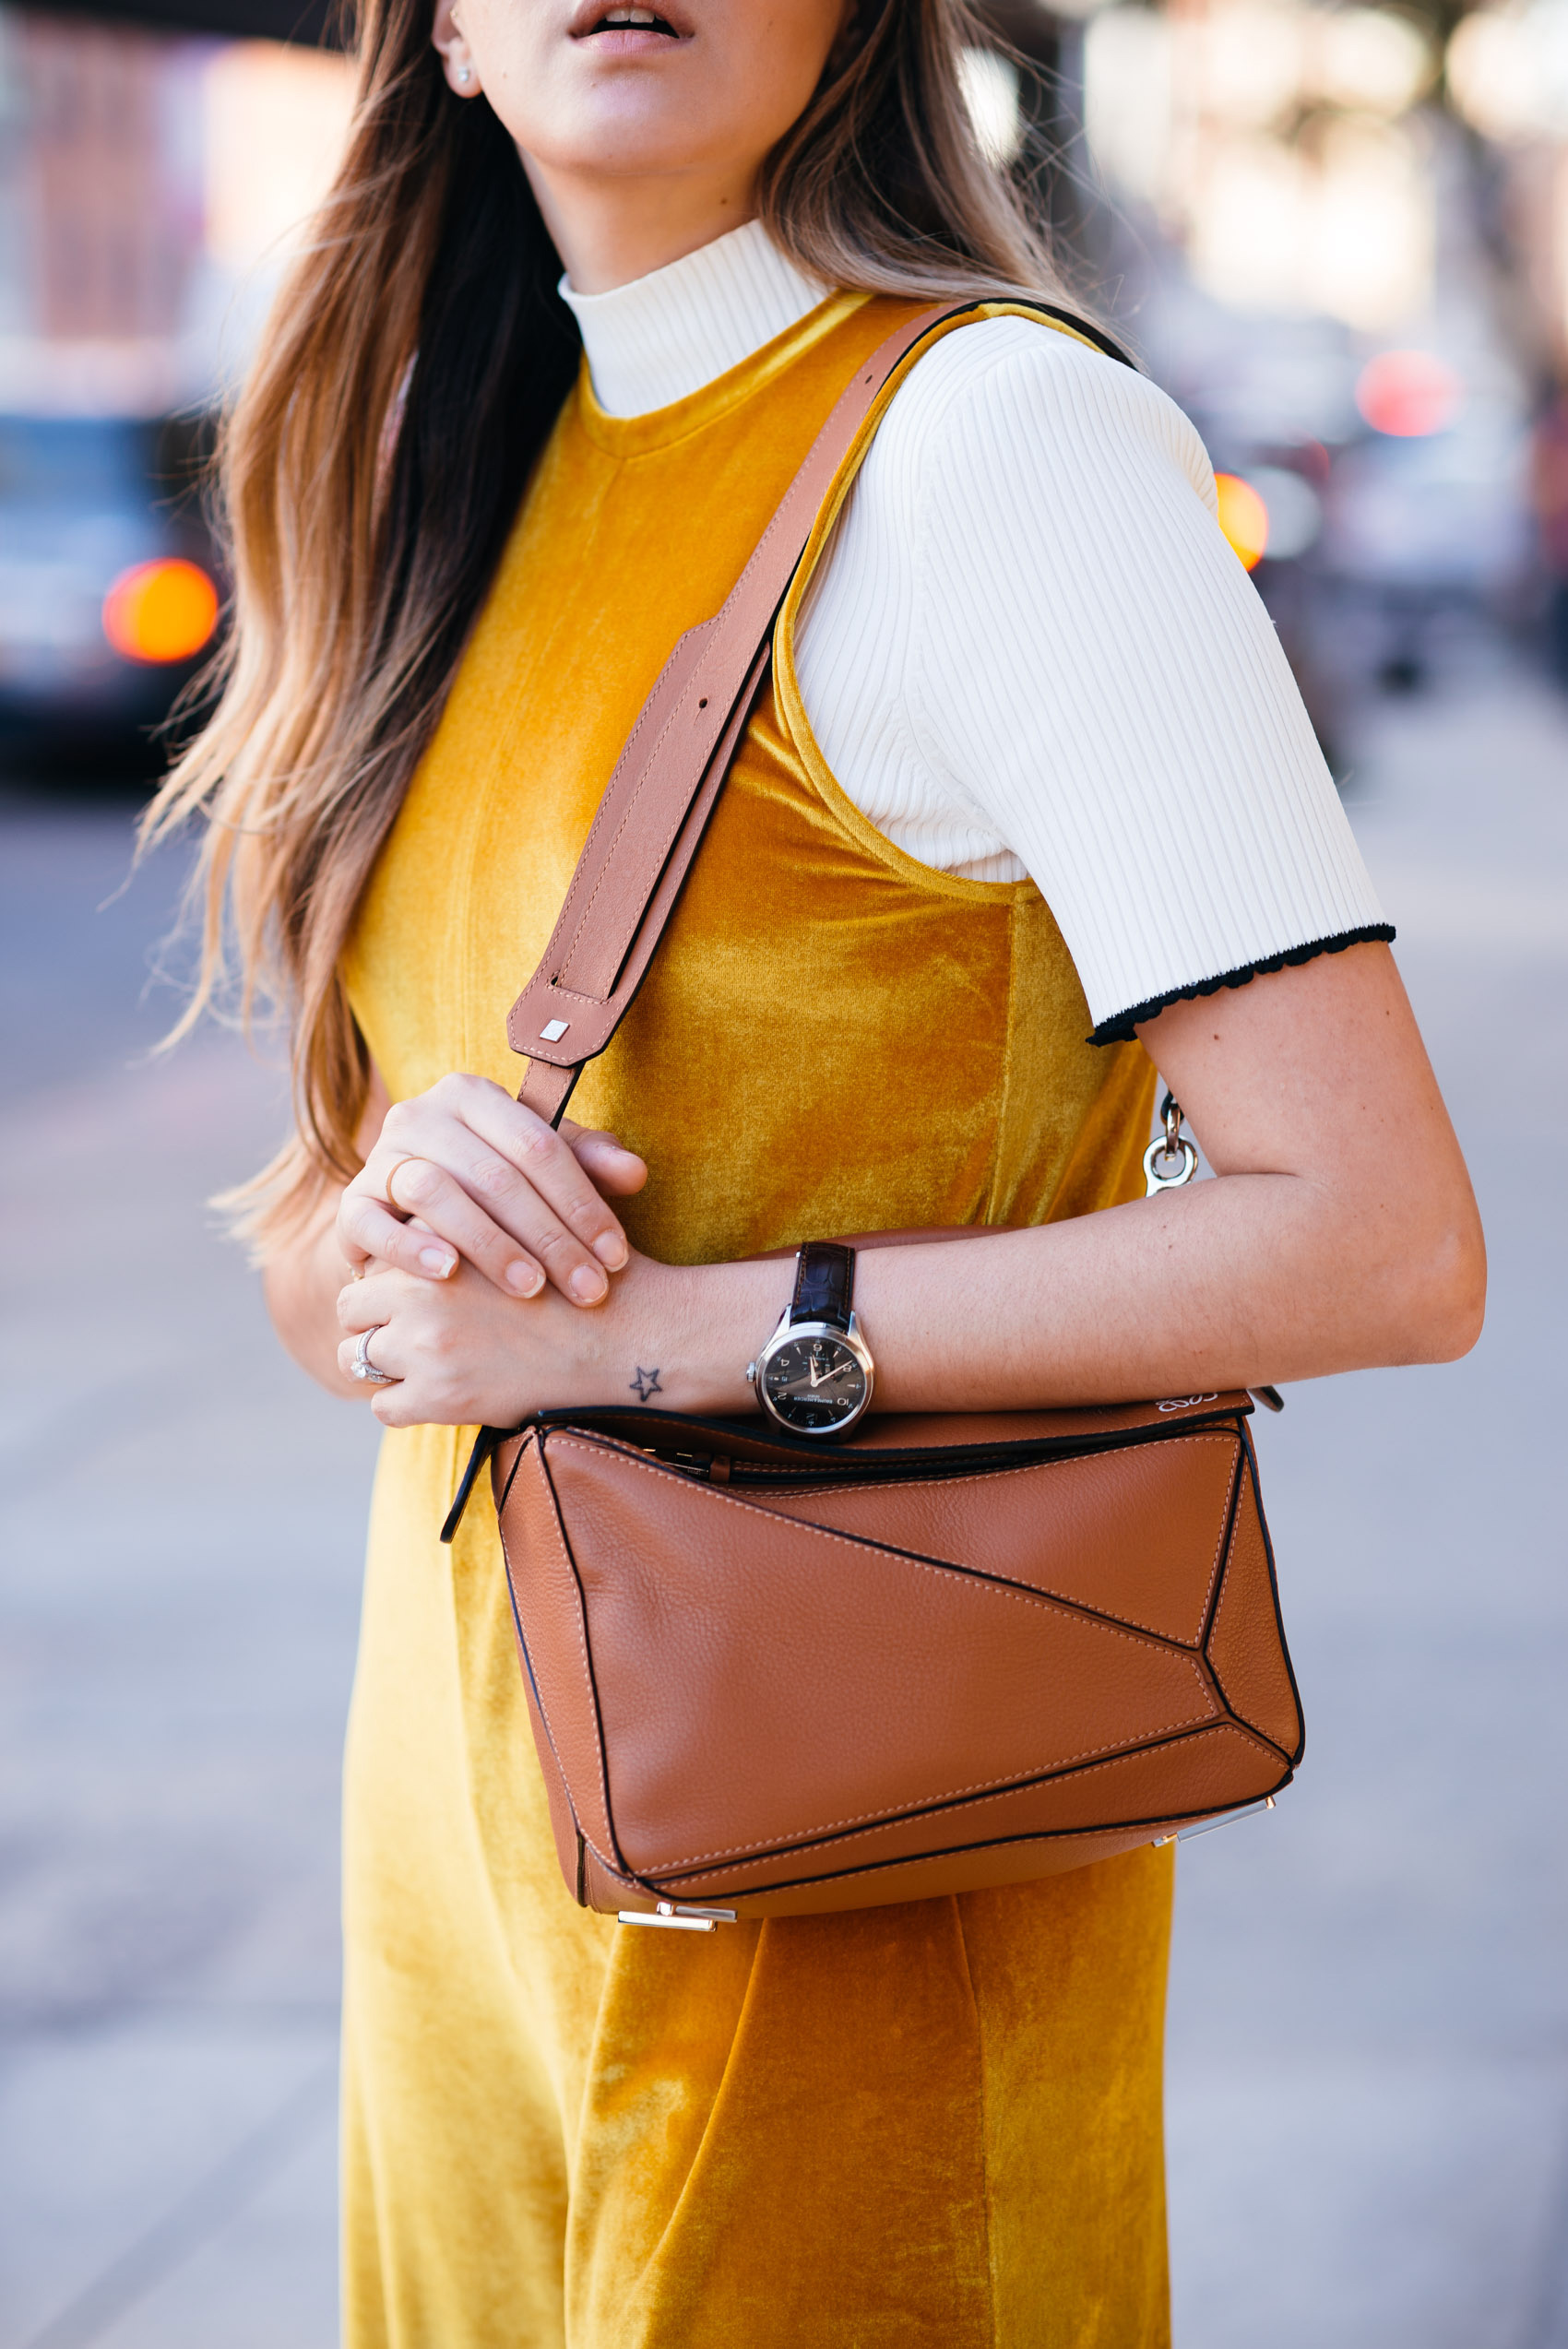 Maristella wearing a yellow gold jumpsuit with a ribbed contrast sleeve sweater and Loewe bag by Jonathan Anderson